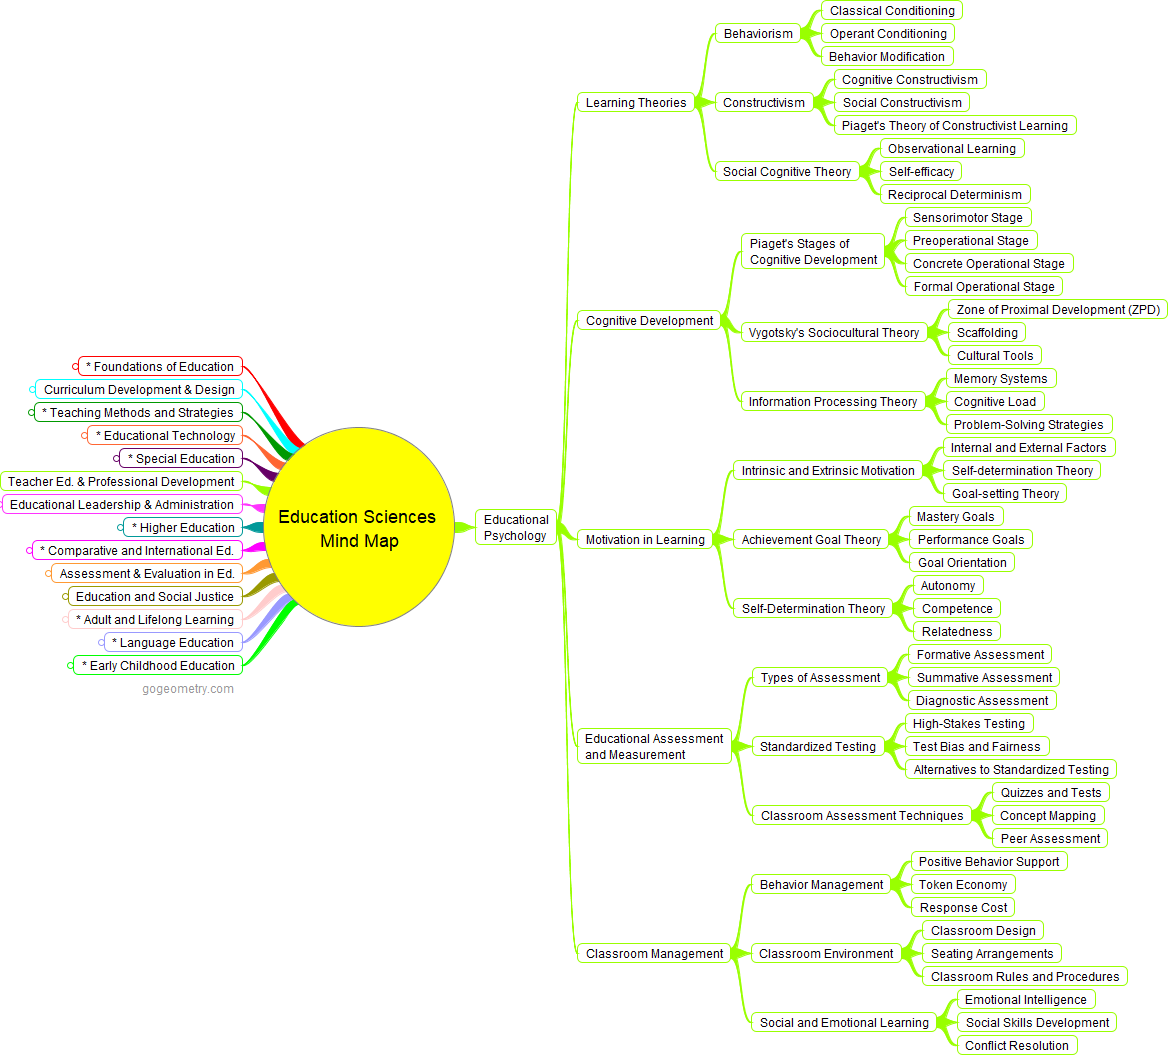 An image containing a Comprehensive Mind Map: Education Sciences: Educational Psychology